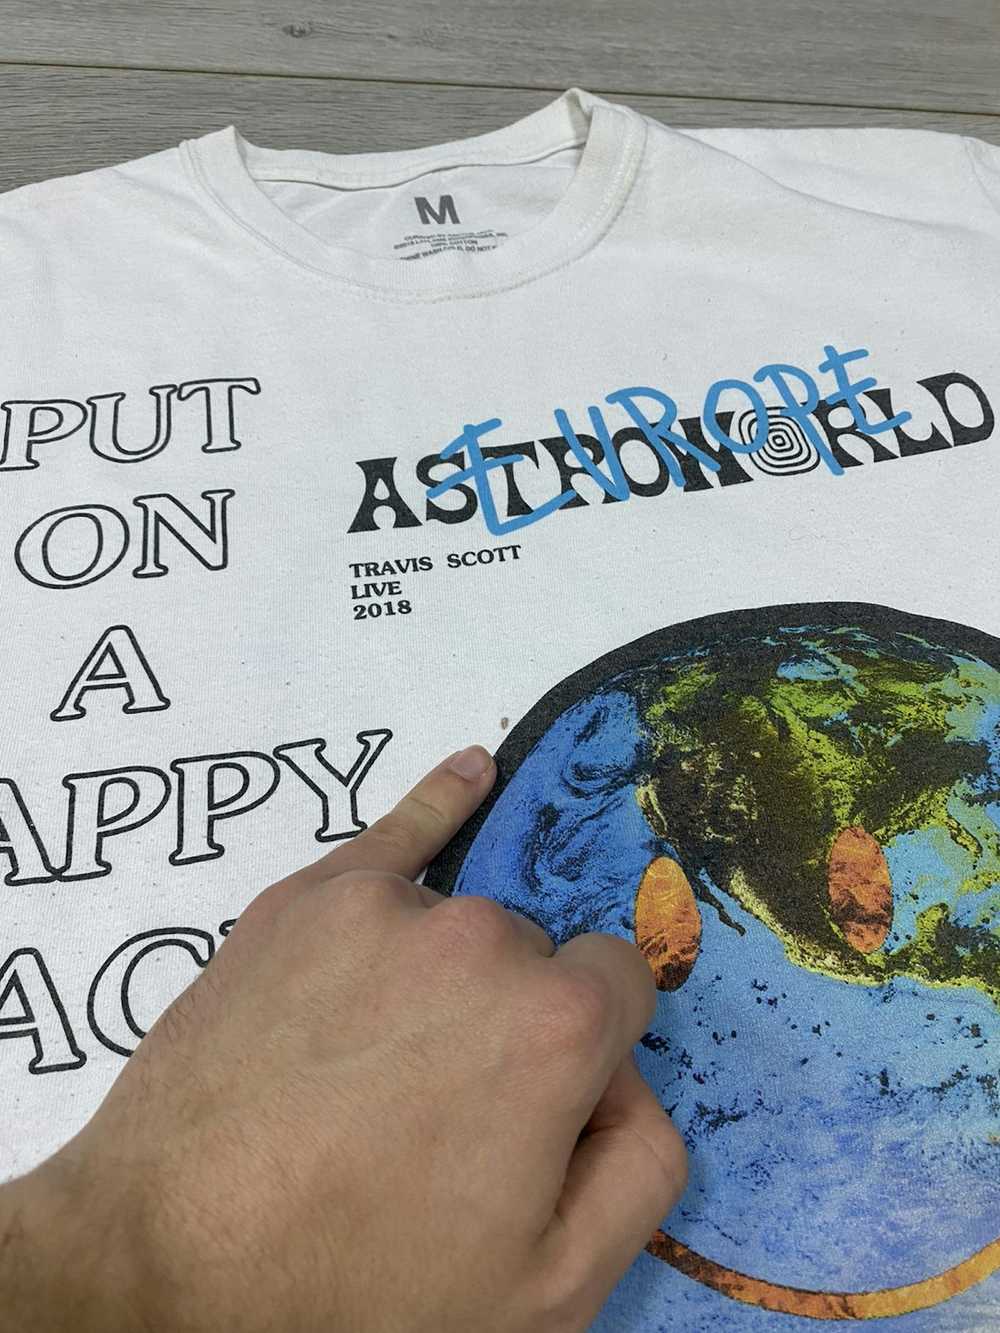 Travis Scott Astroworld Put on a Happy Face Tee - image 7